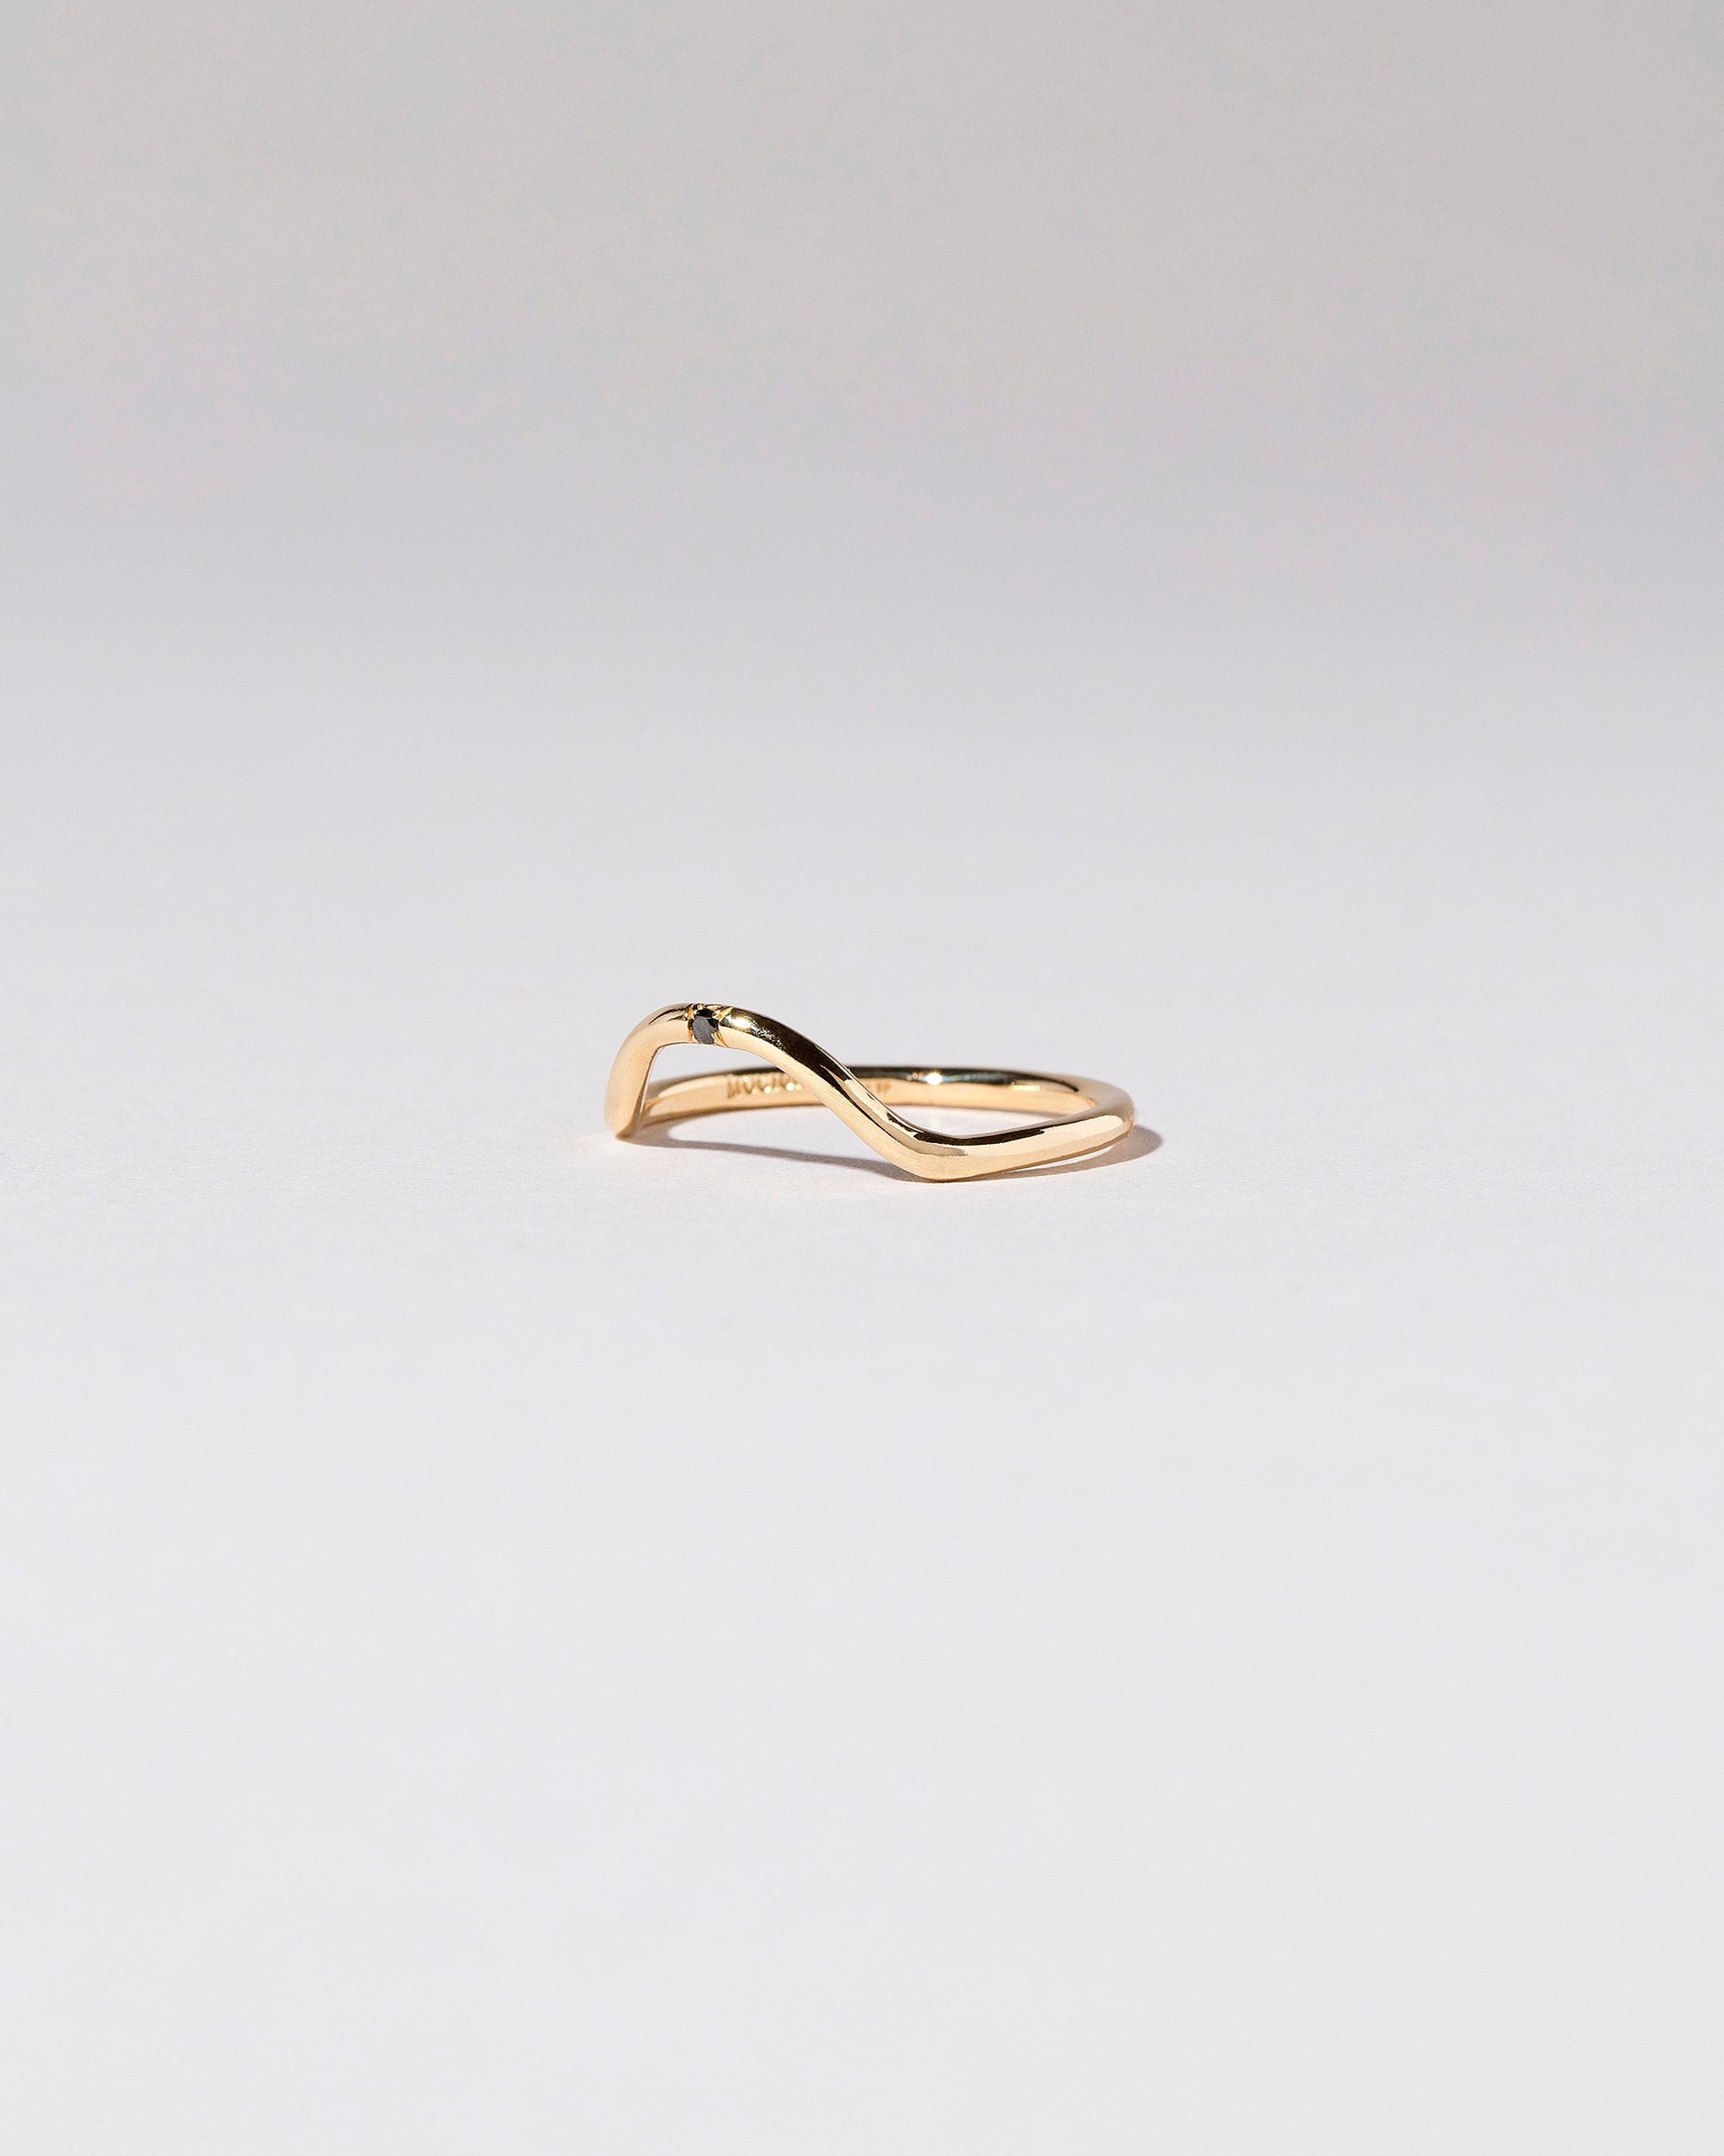  Curve Band - Single Stone on light color background.